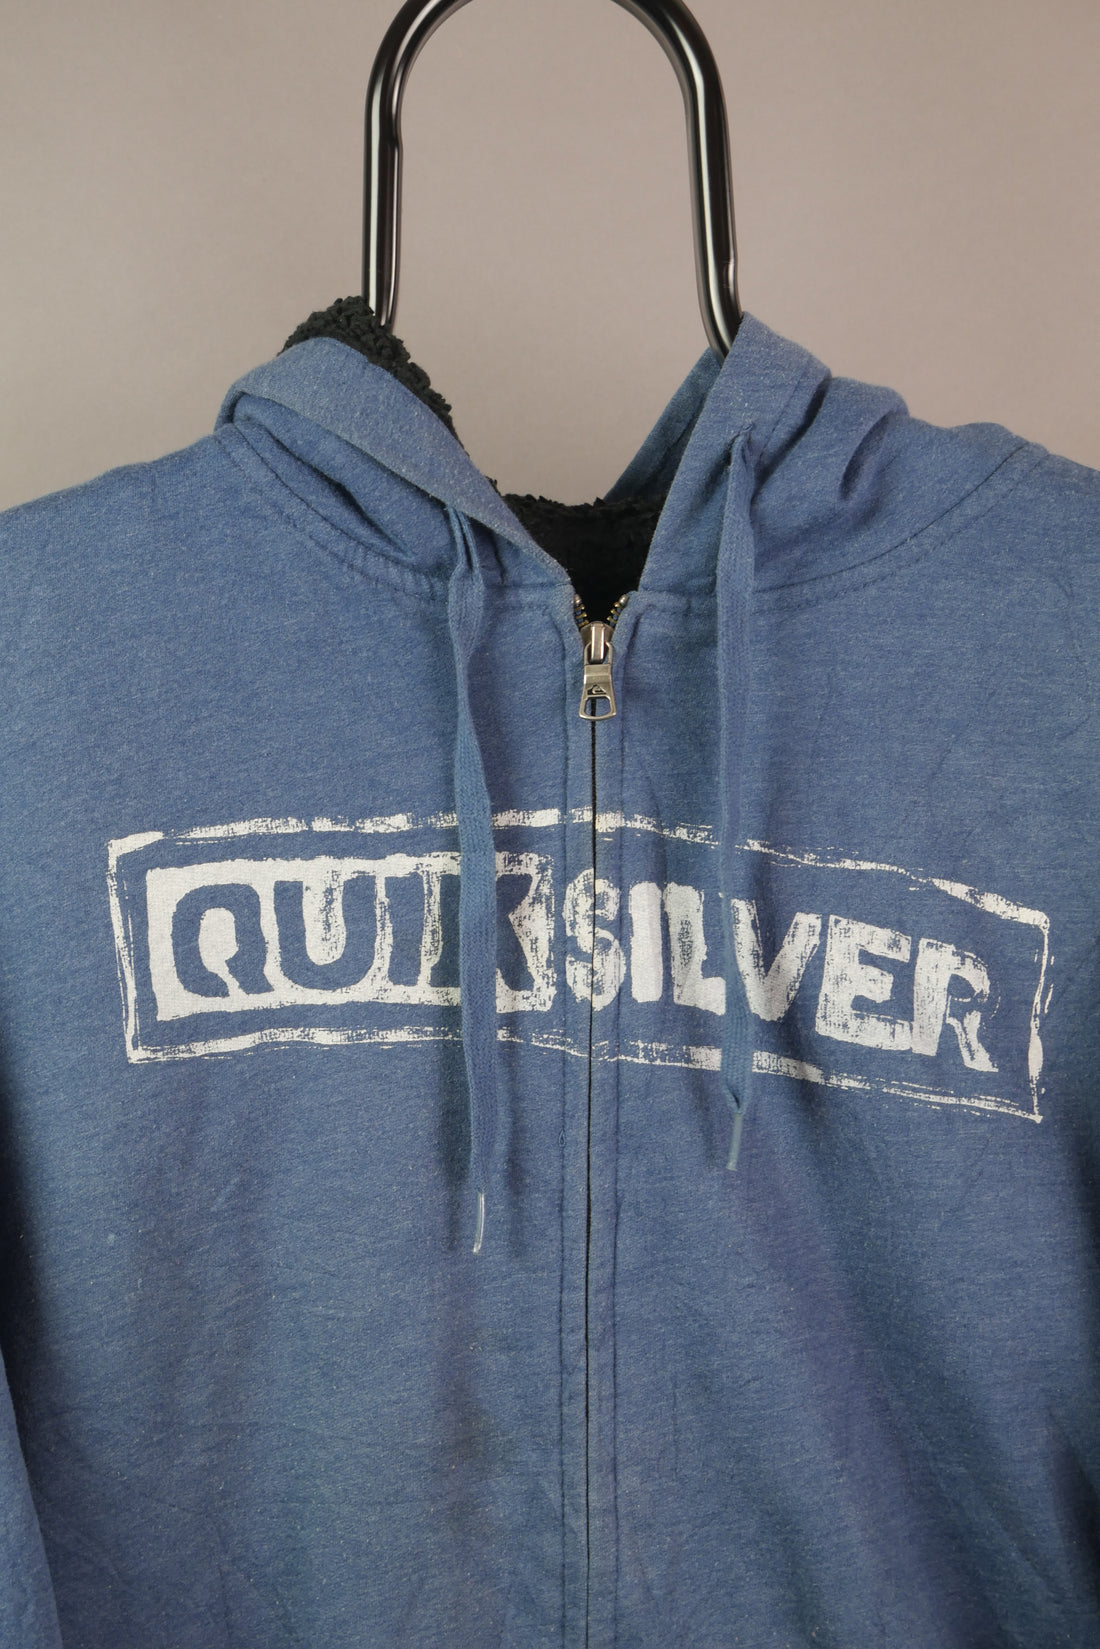 The Quicksilver Hoodie (L)